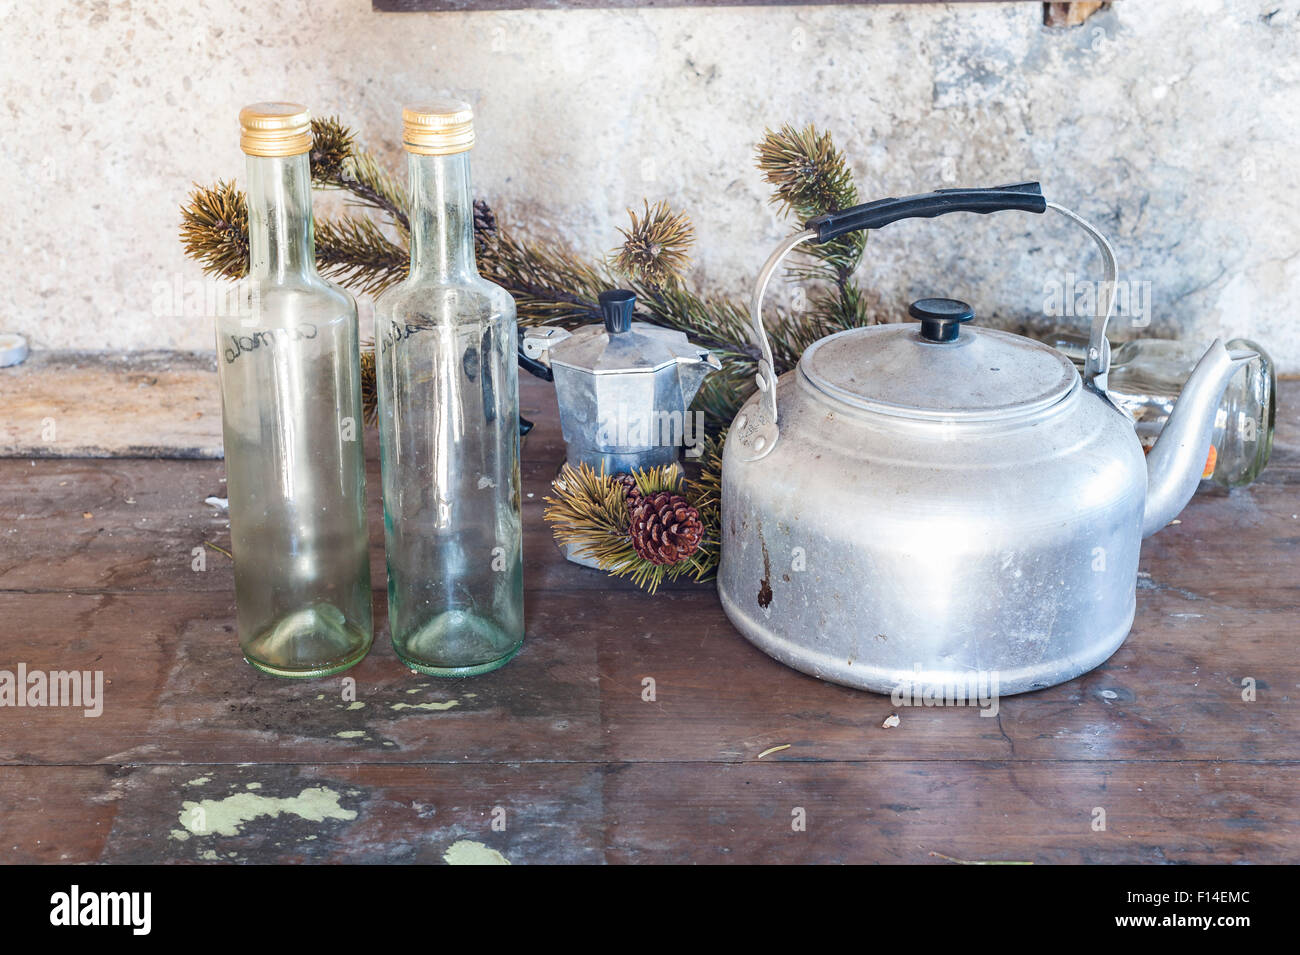 Old objects on a table to kitchen: kettle, coffeepot and two bottles Stock Photo